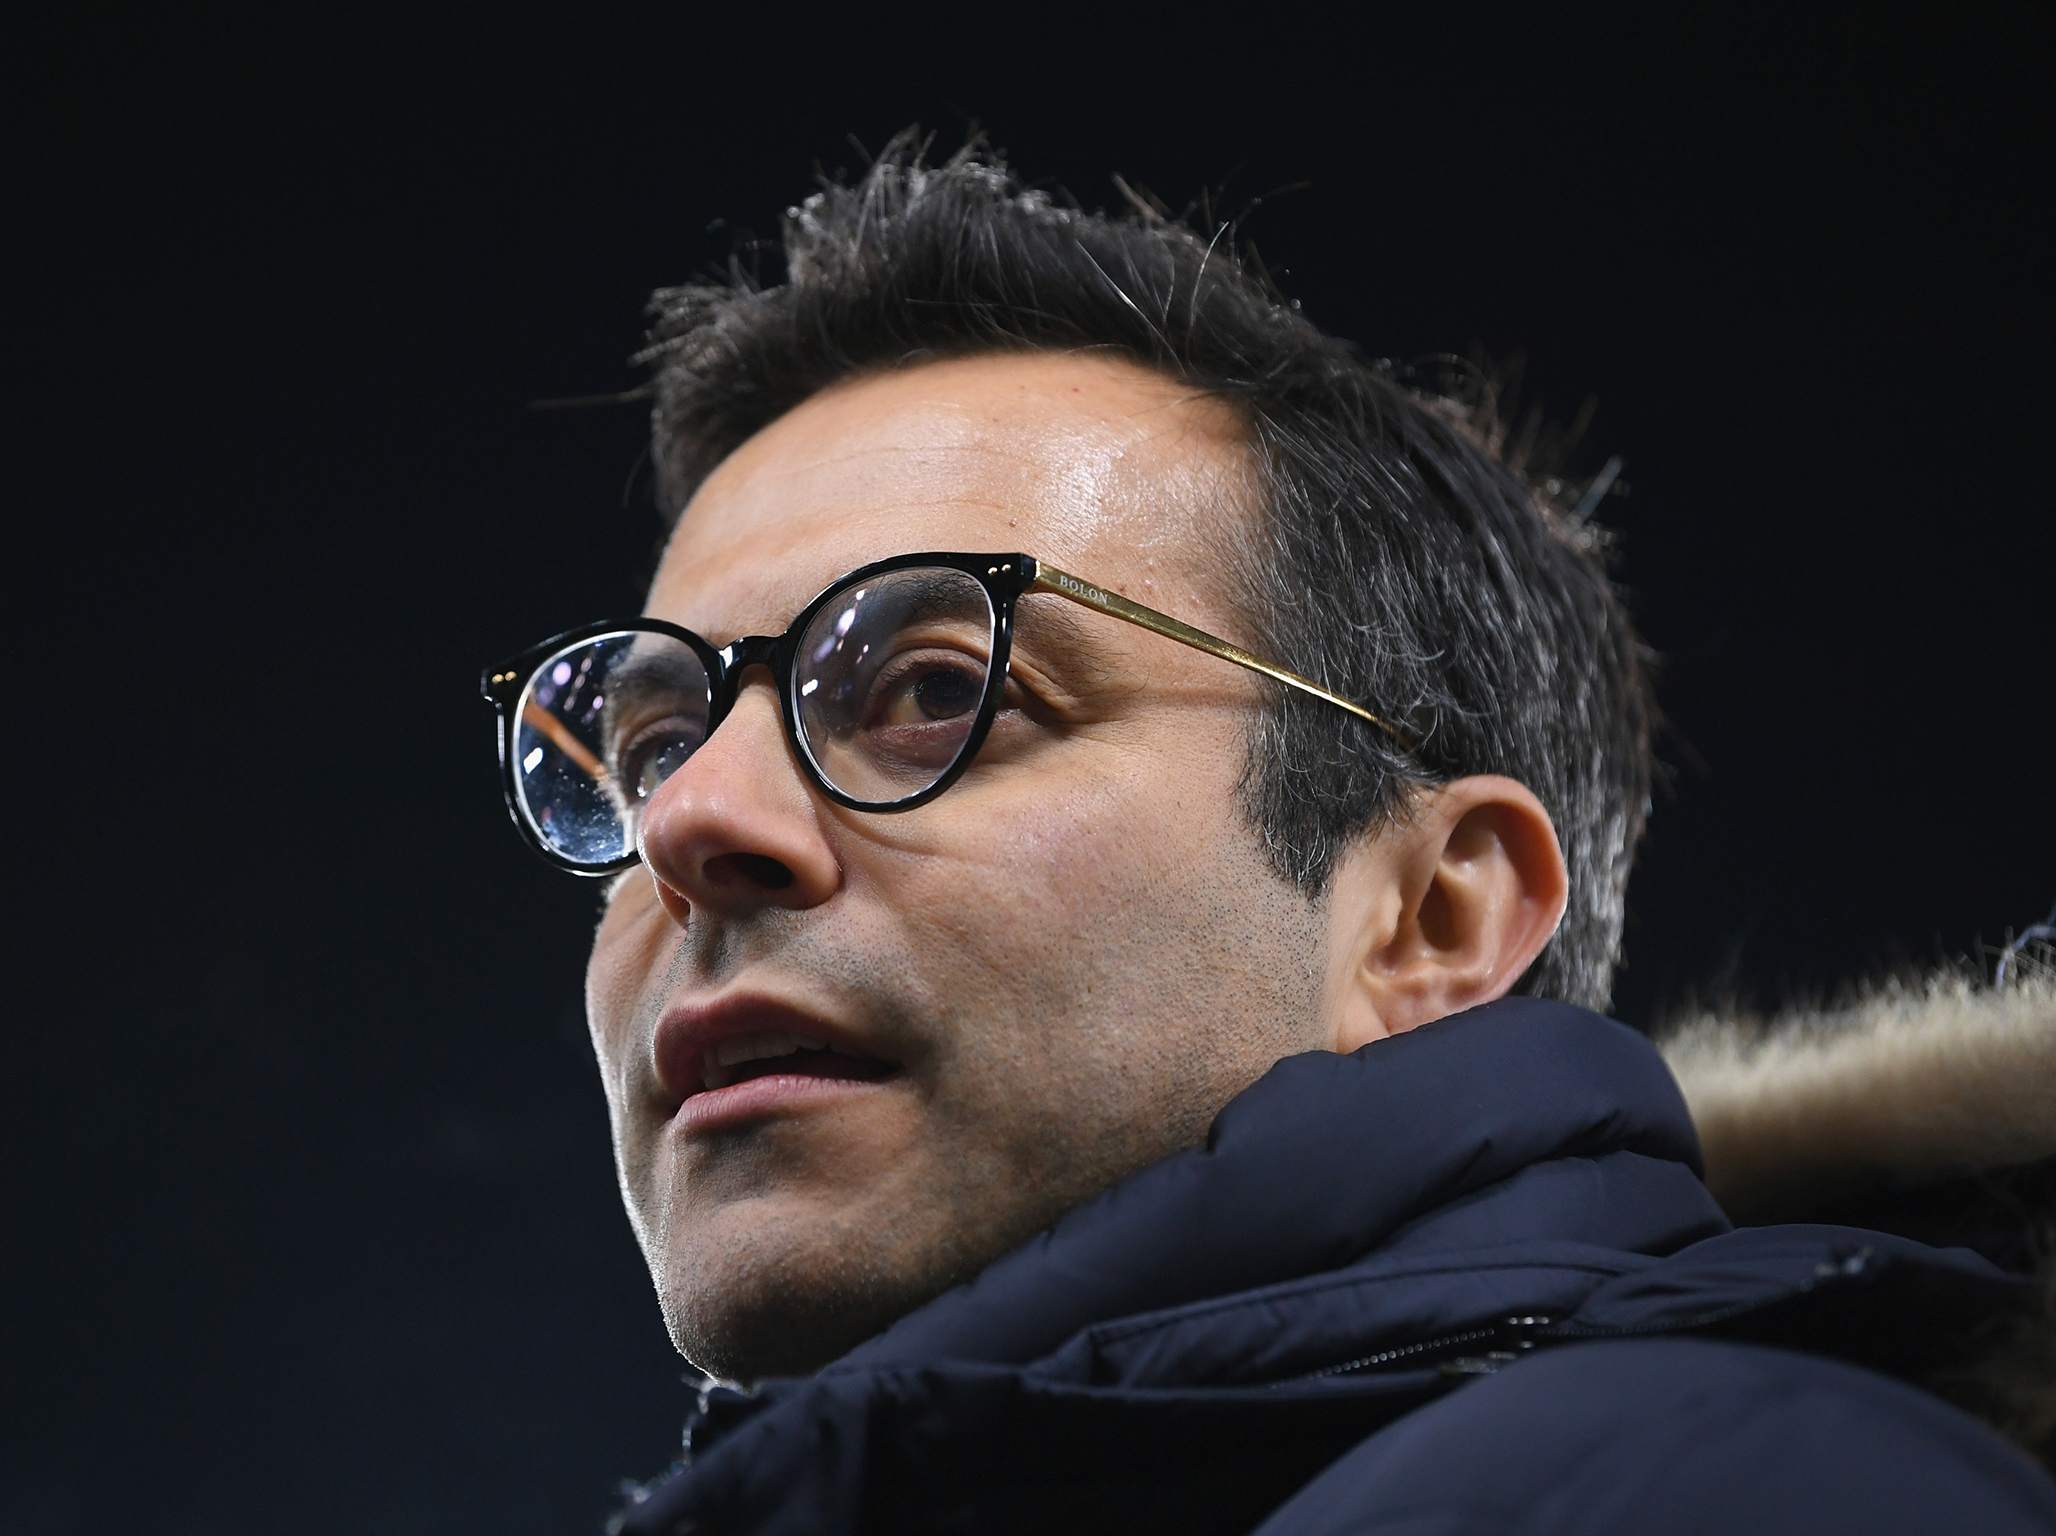 Andrea Radrizzani took responsibility for the tweet